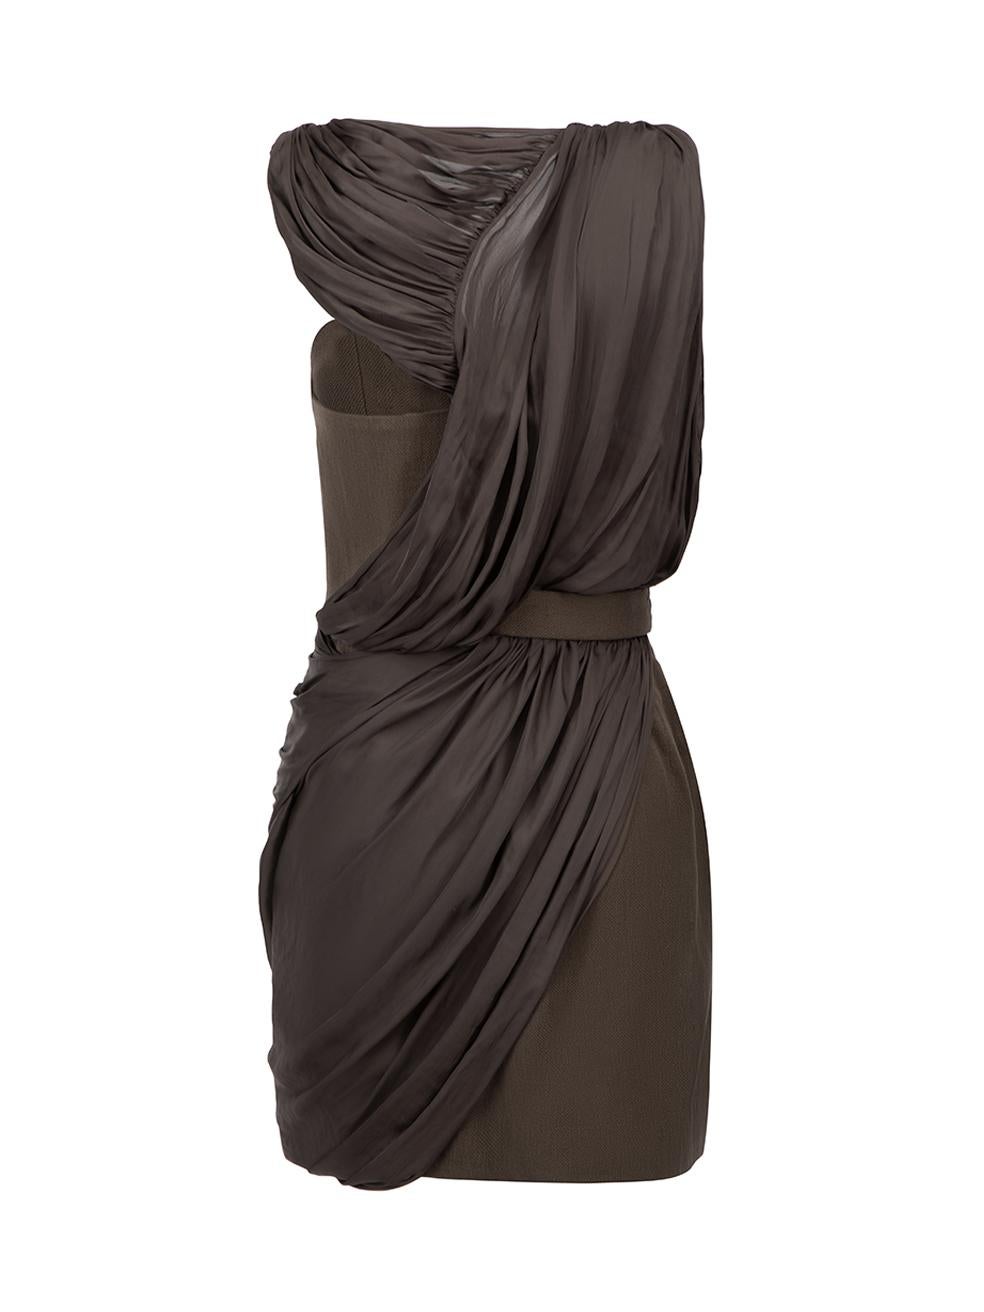 Alexander Wang Brown Asymmetric Draped Mini Dress Size S In Excellent Condition For Sale In London, GB